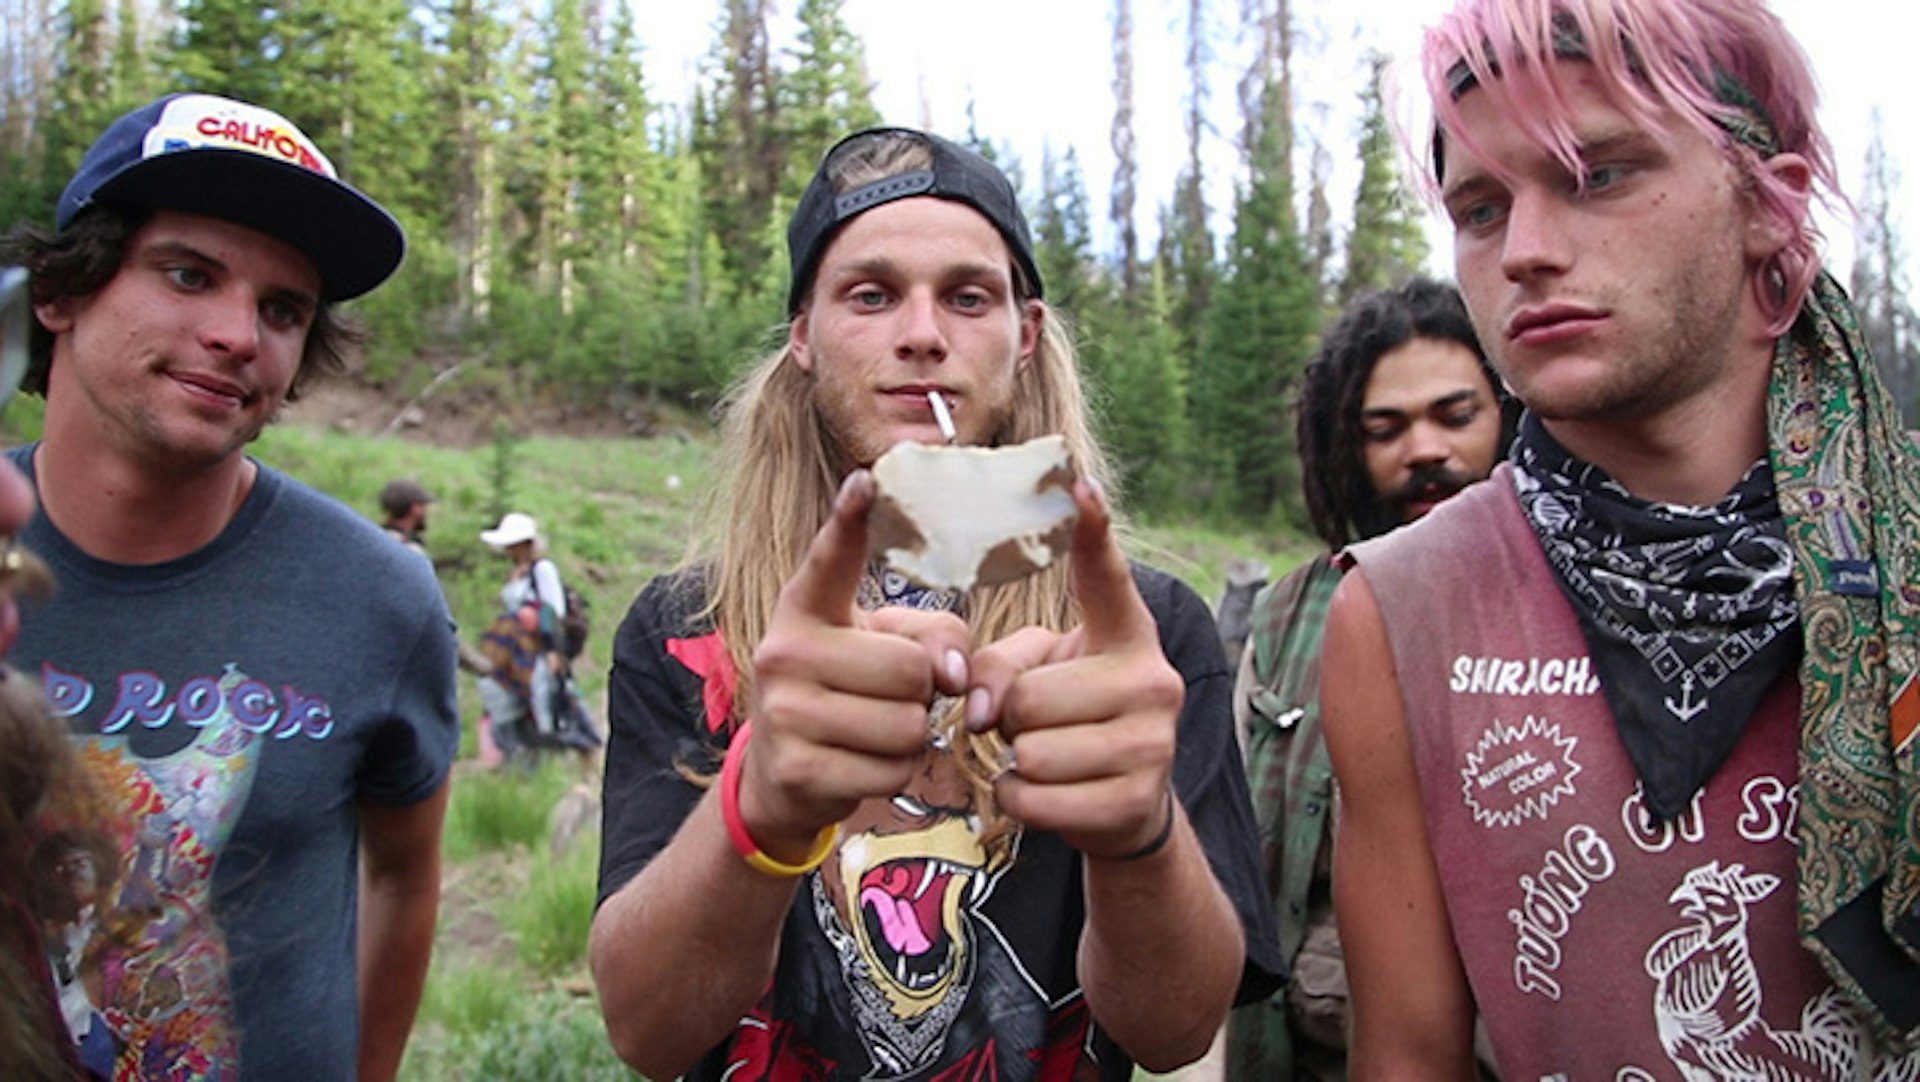 New doc on Rainbow Gatherings: where disenfranchised Americans build their own utopia